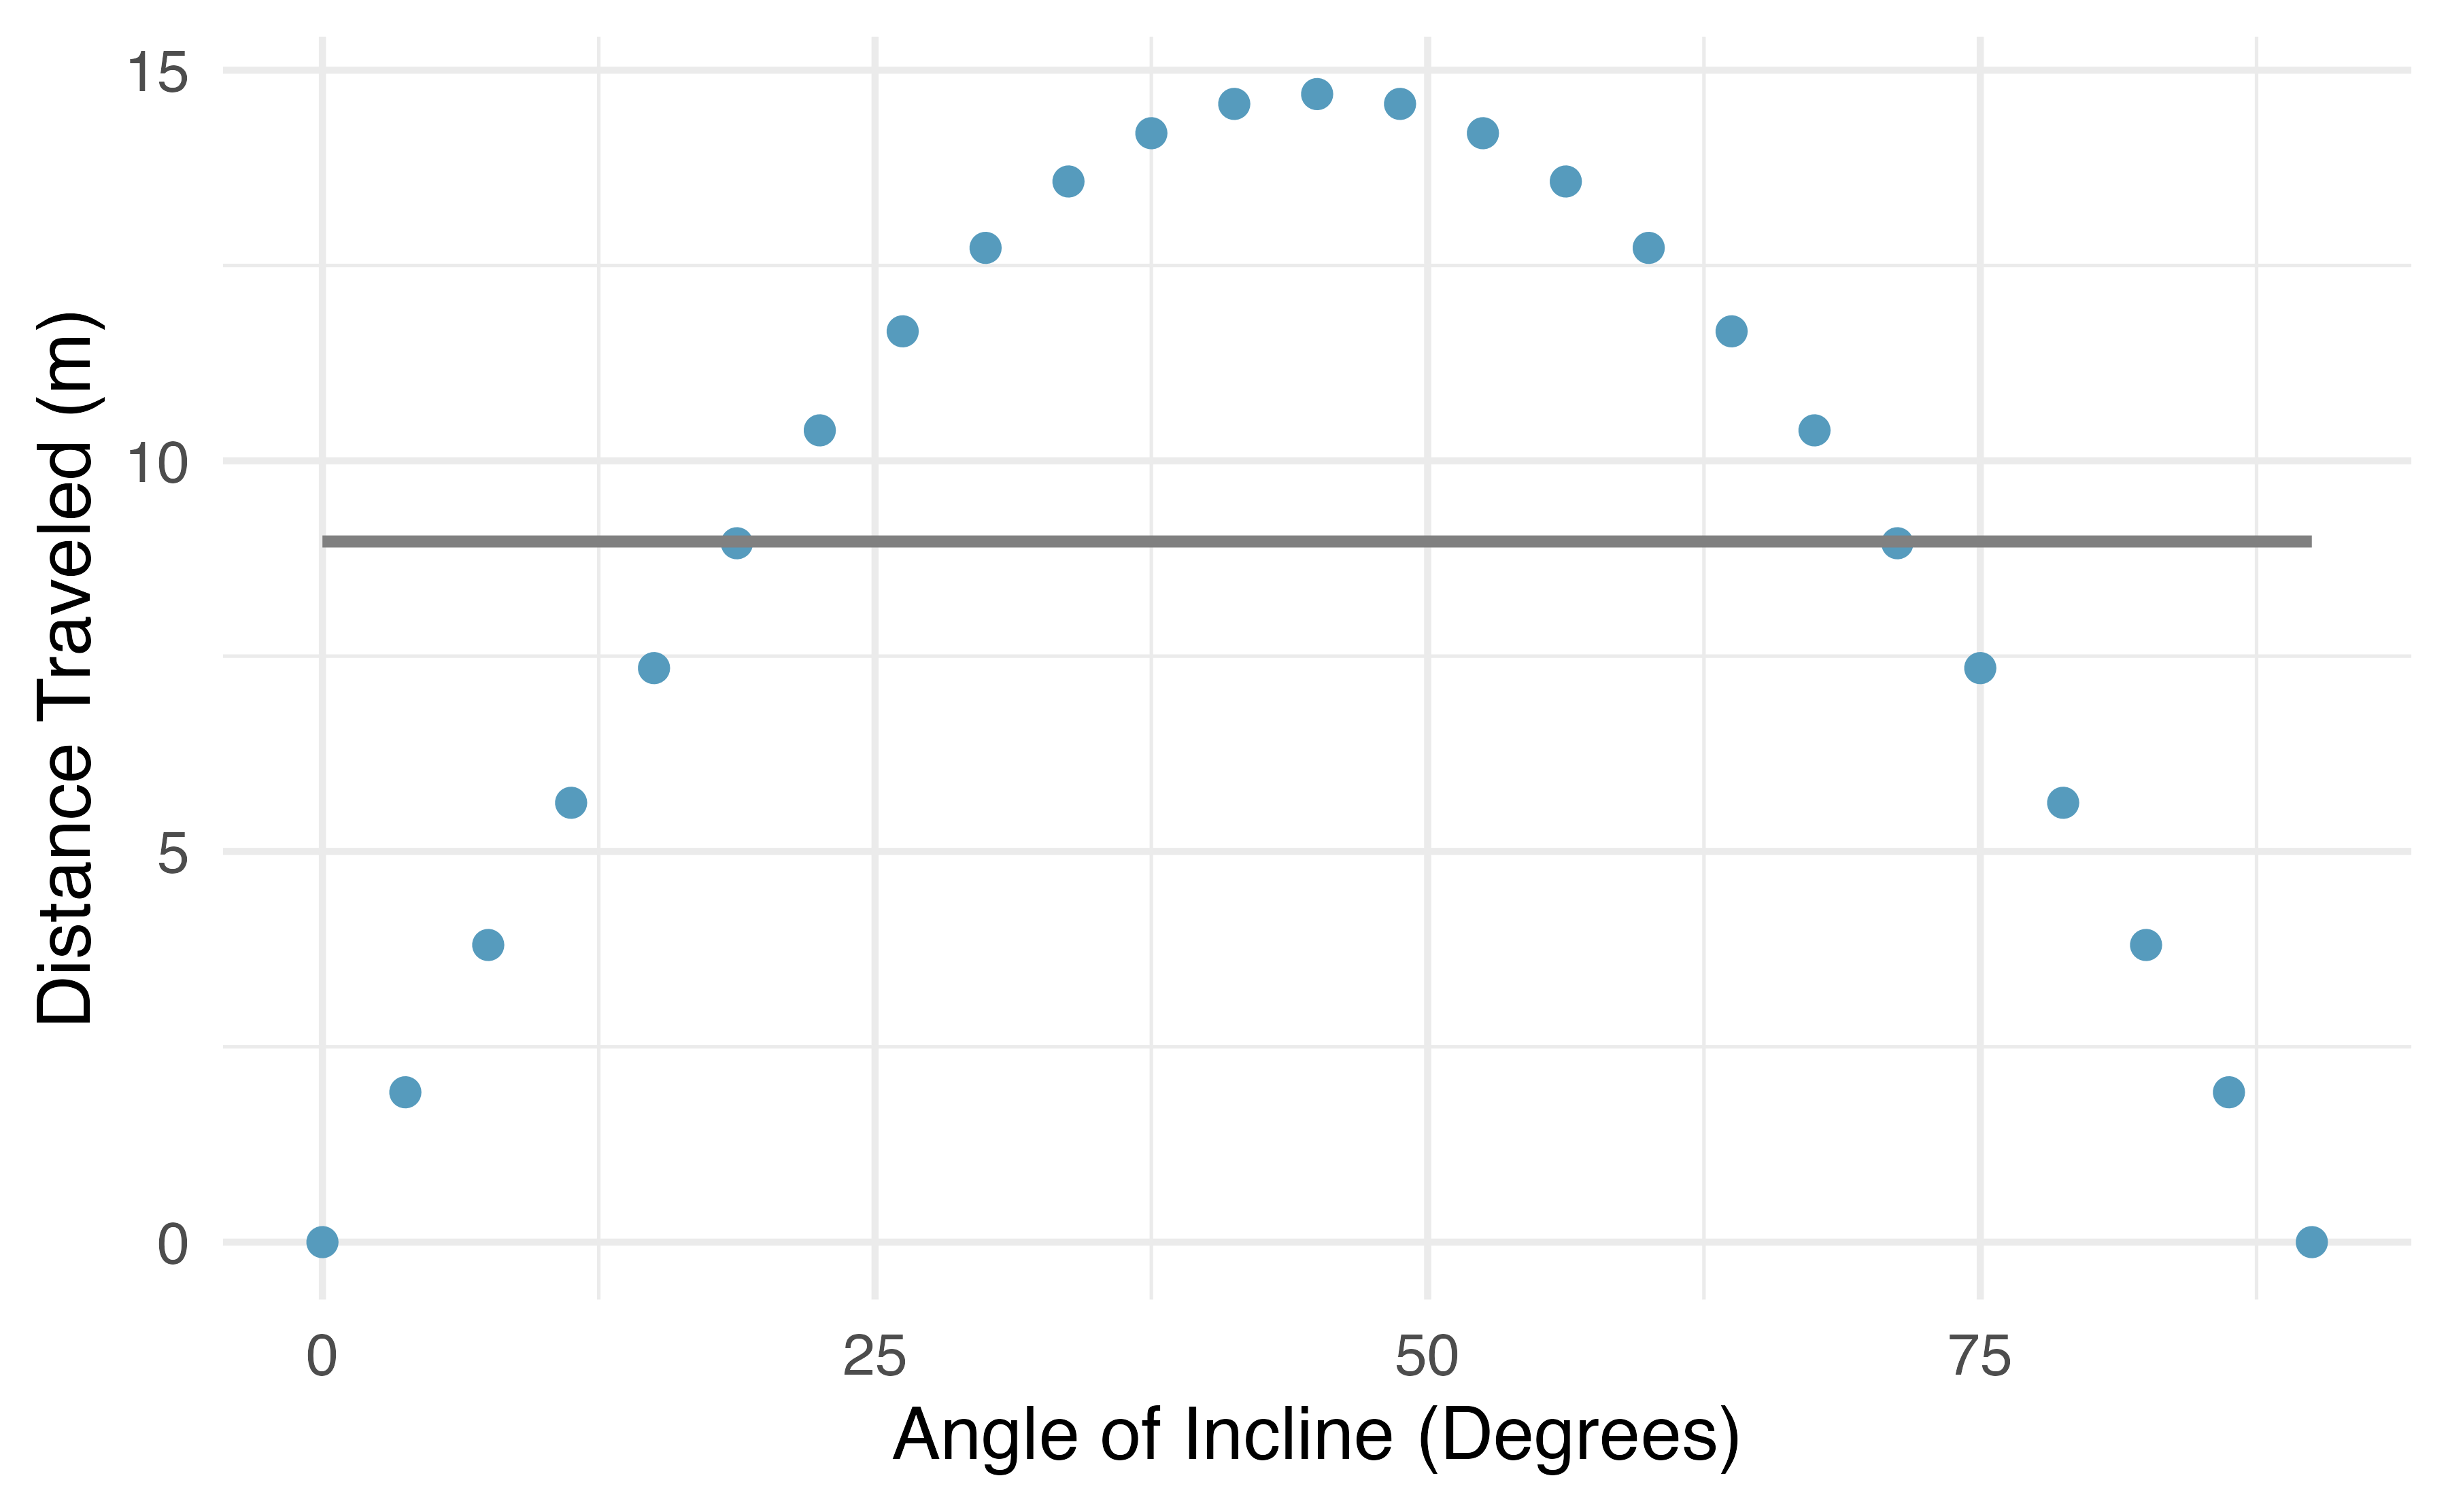 A scatterplot showing a perfect quadratic relationship between angle of incline on the x-axis and distance traveled on the y-axis. The line of best fit is superimposed as a perfectly horizontal line. That is to say, the variables are clearly related, but they do not have a linear relationship.